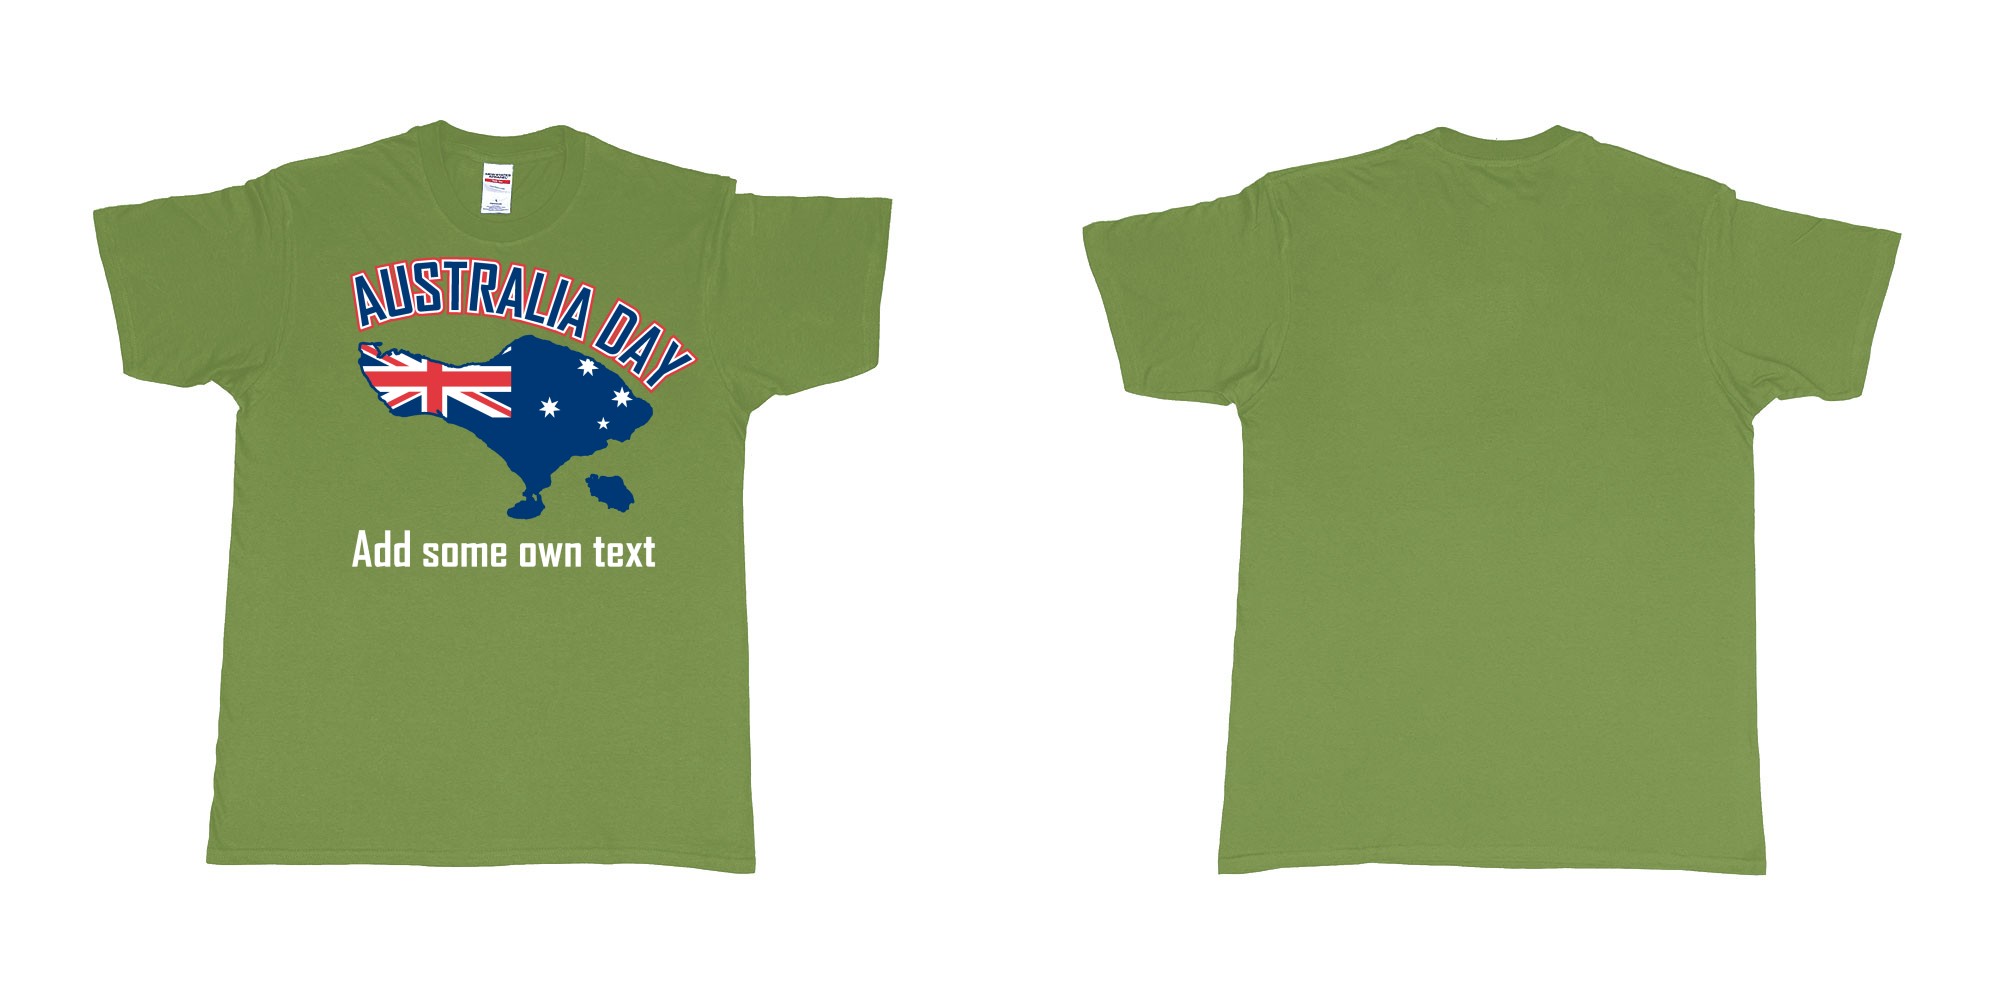 Custom tshirt design australia day in bali custom teeshirt printing in fabric color military-green choice your own text made in Bali by The Pirate Way